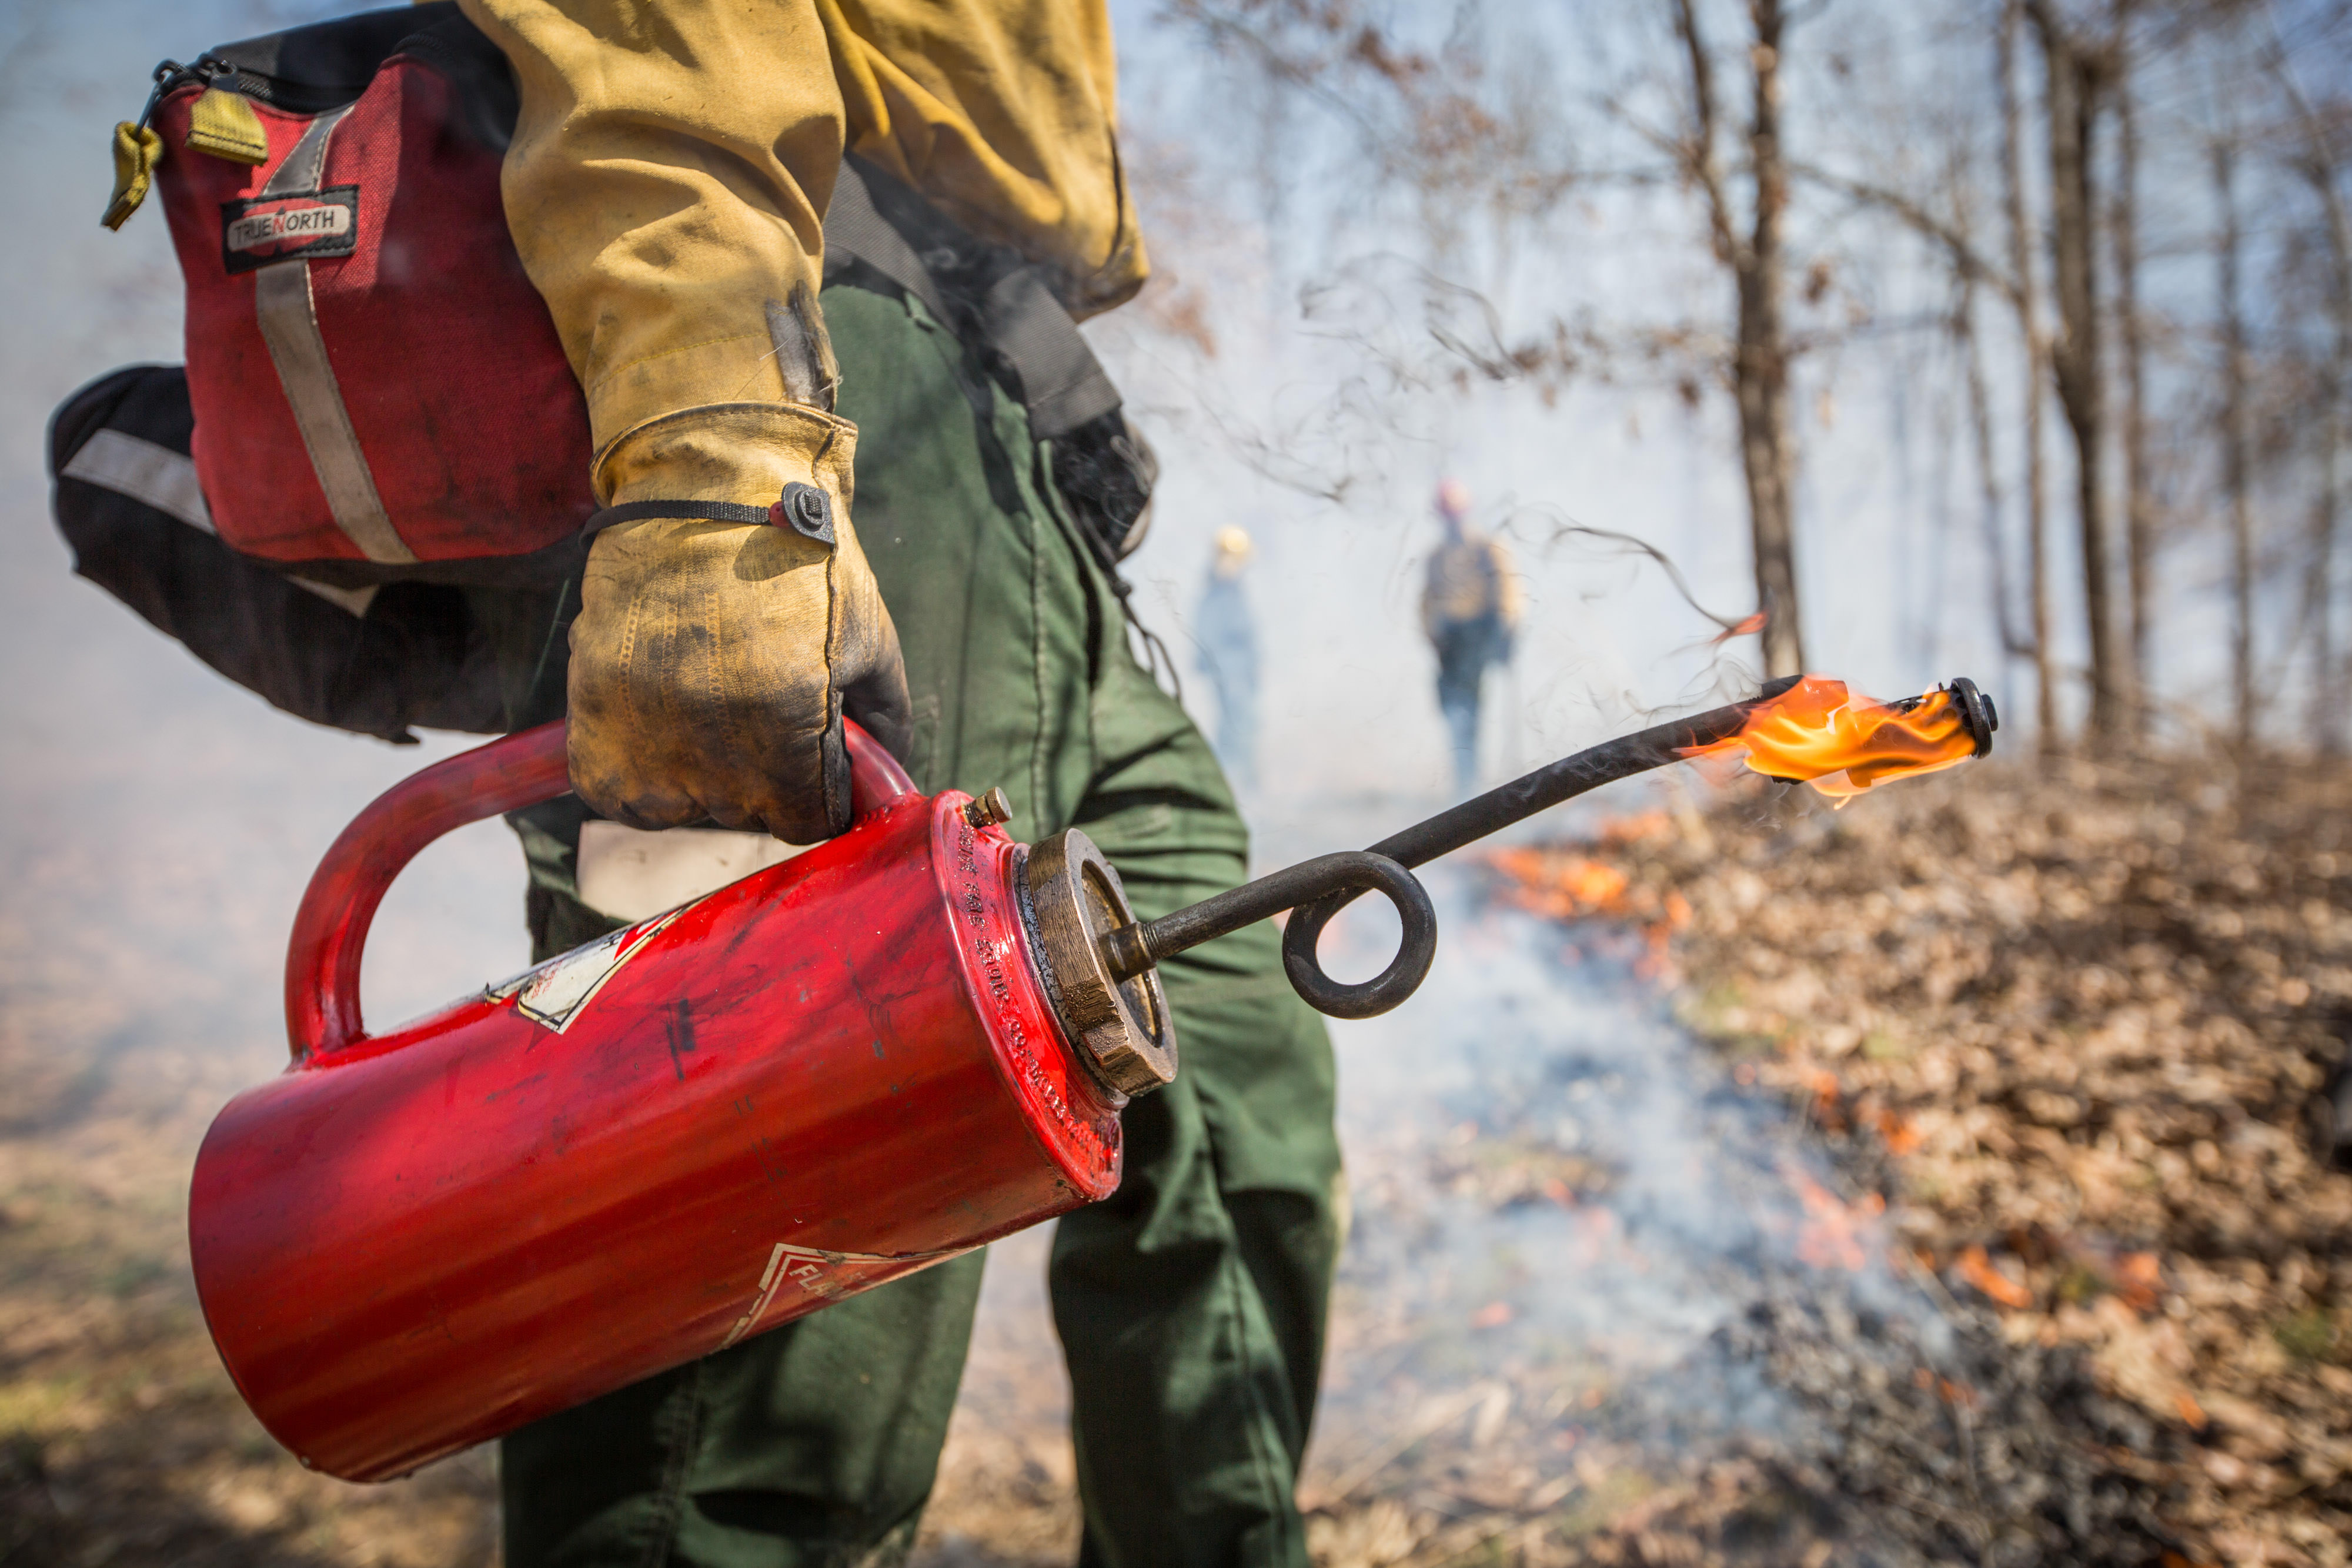 A red drip torch apparatus is held by a person wearing gloves and a pack. 